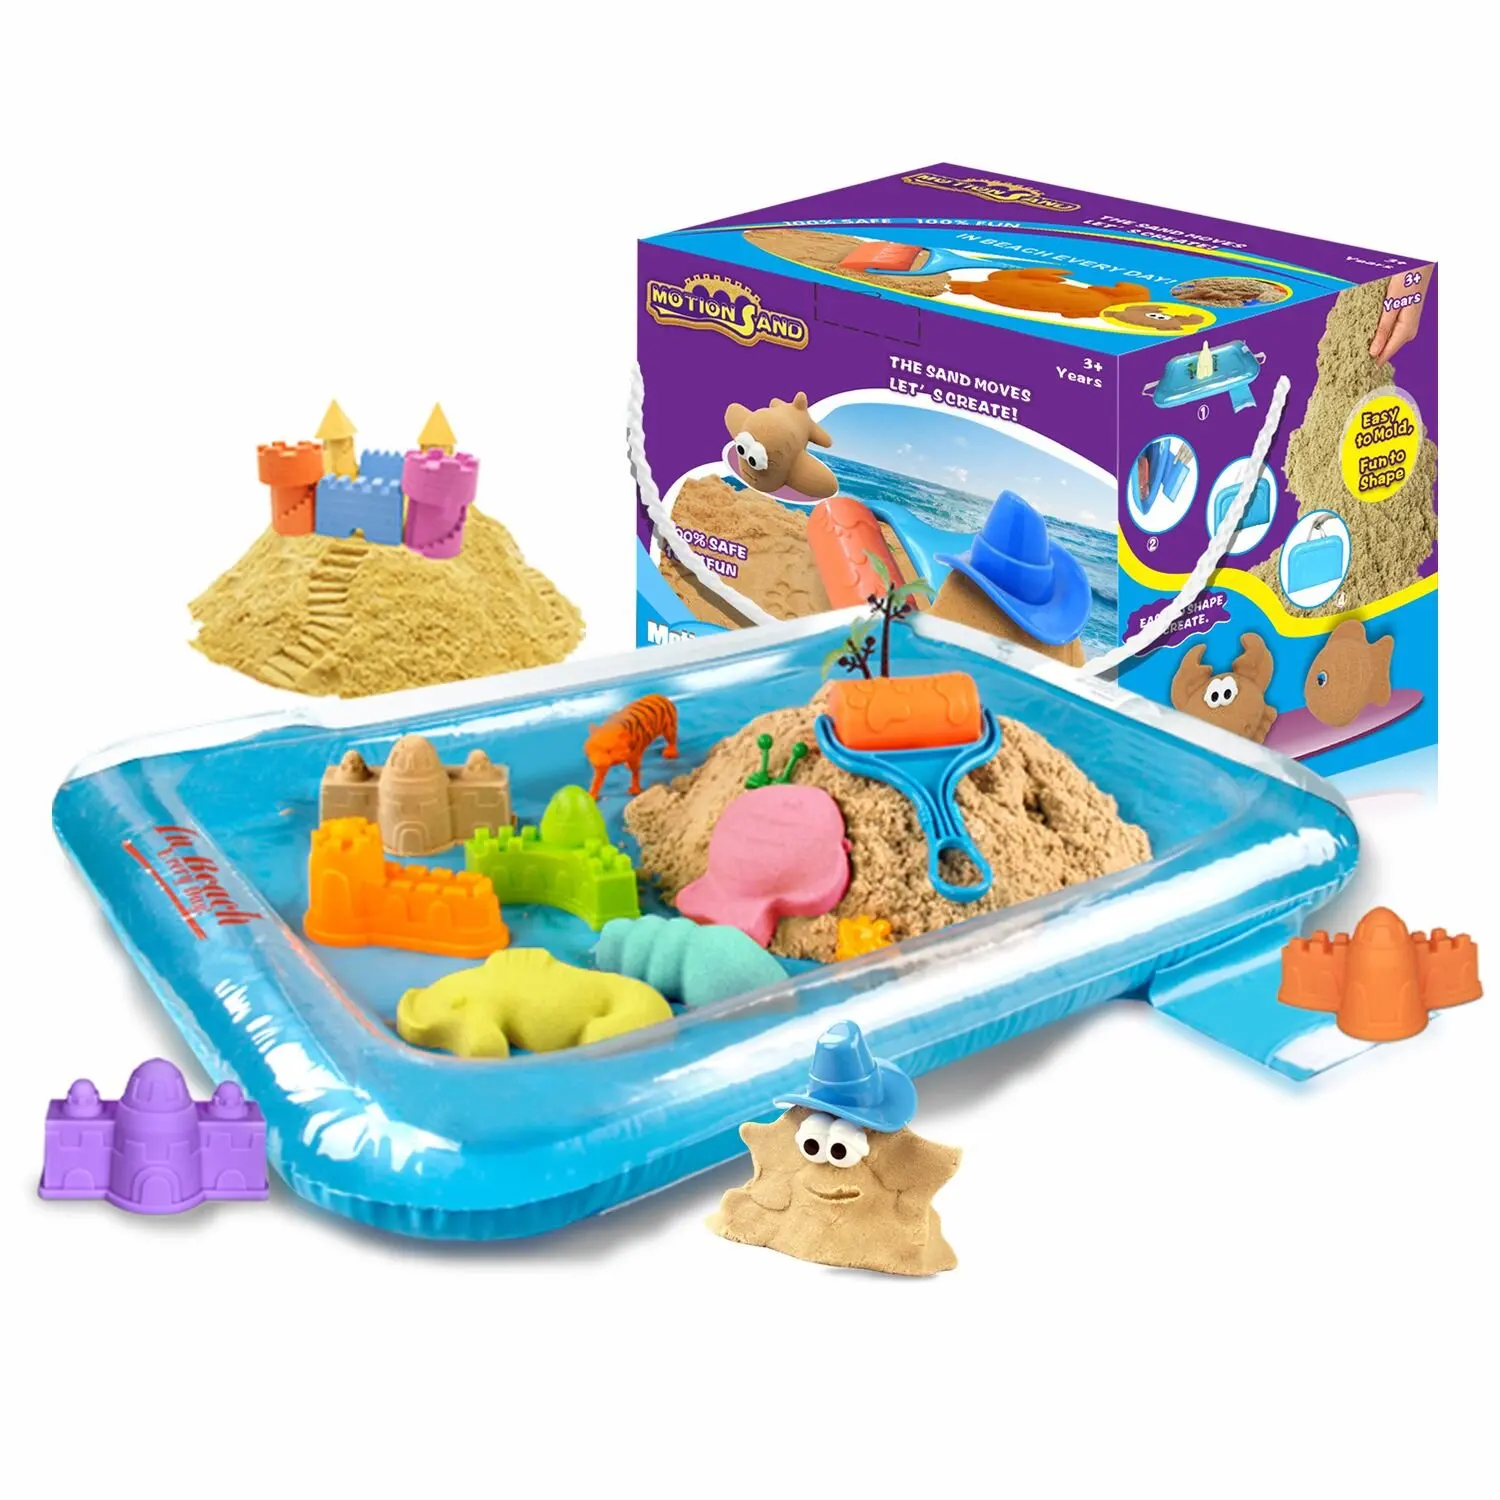 Cheap Play Sand Lowes, find Play Sand Lowes deals on line at Alibaba.com